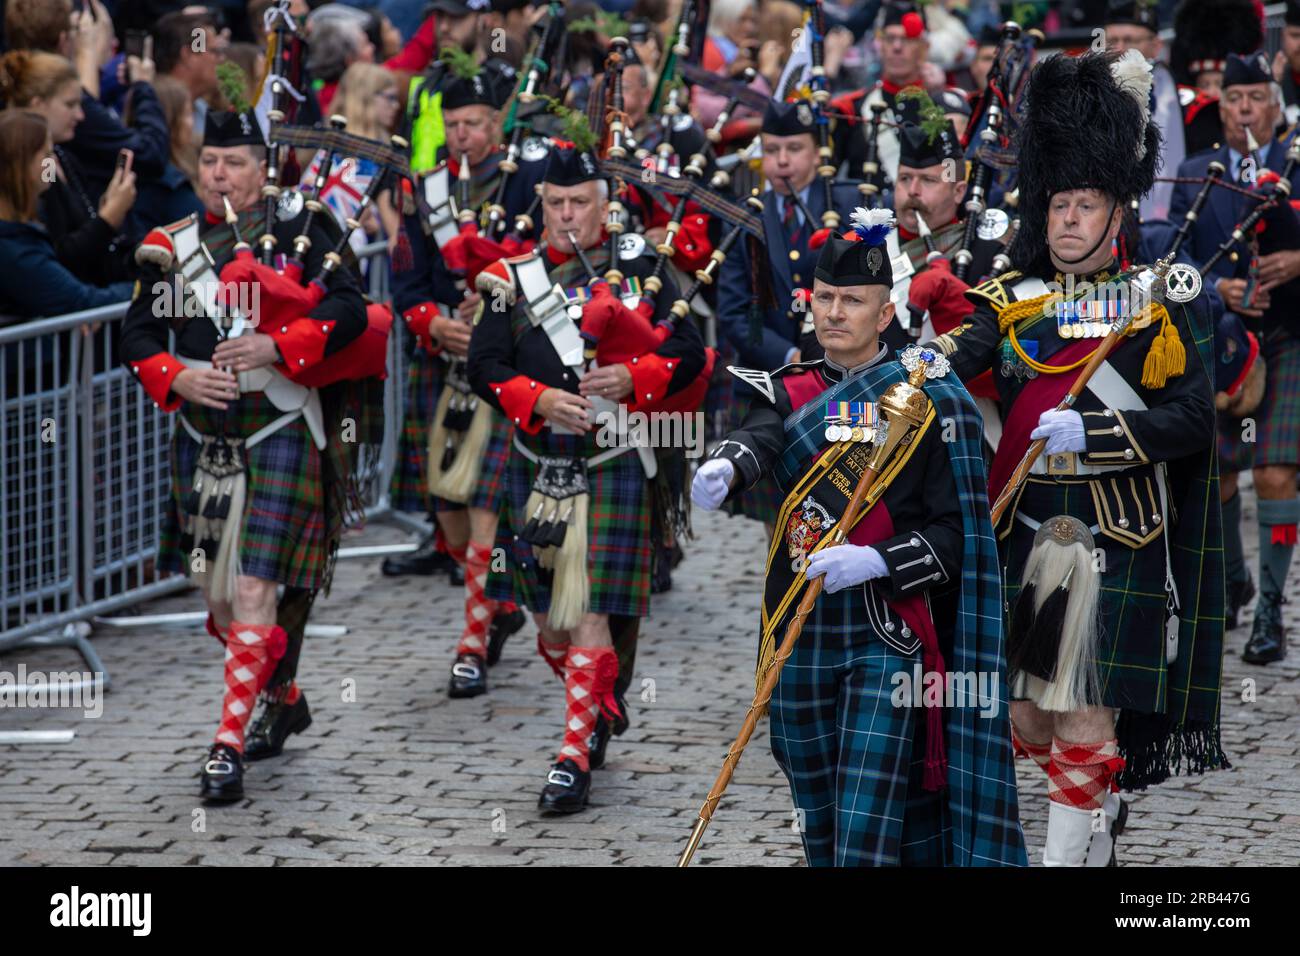 The Royal Edinburgh Military Tattoo Pipes And Drums Stock Photo